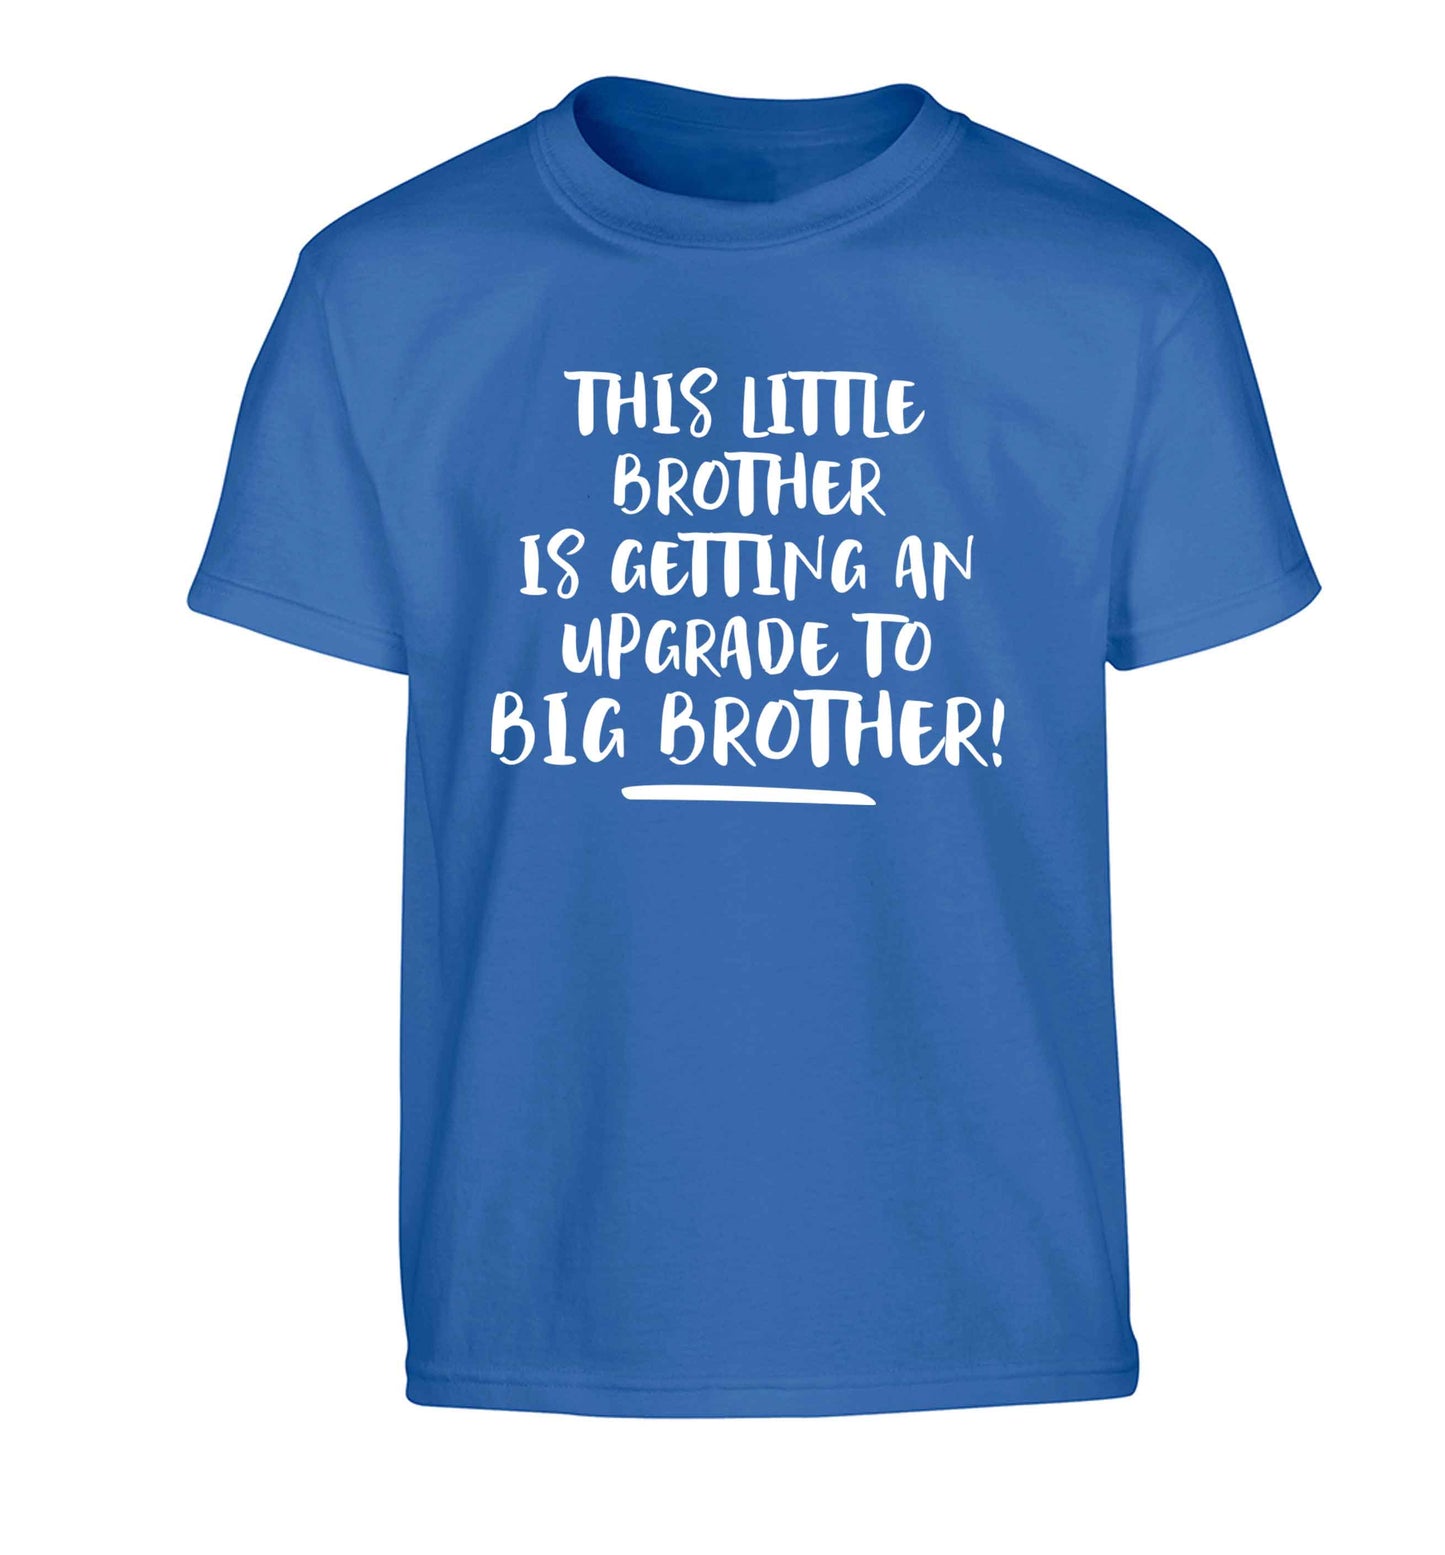 This little brother is getting an upgrade to big brother! Children's blue Tshirt 12-13 Years